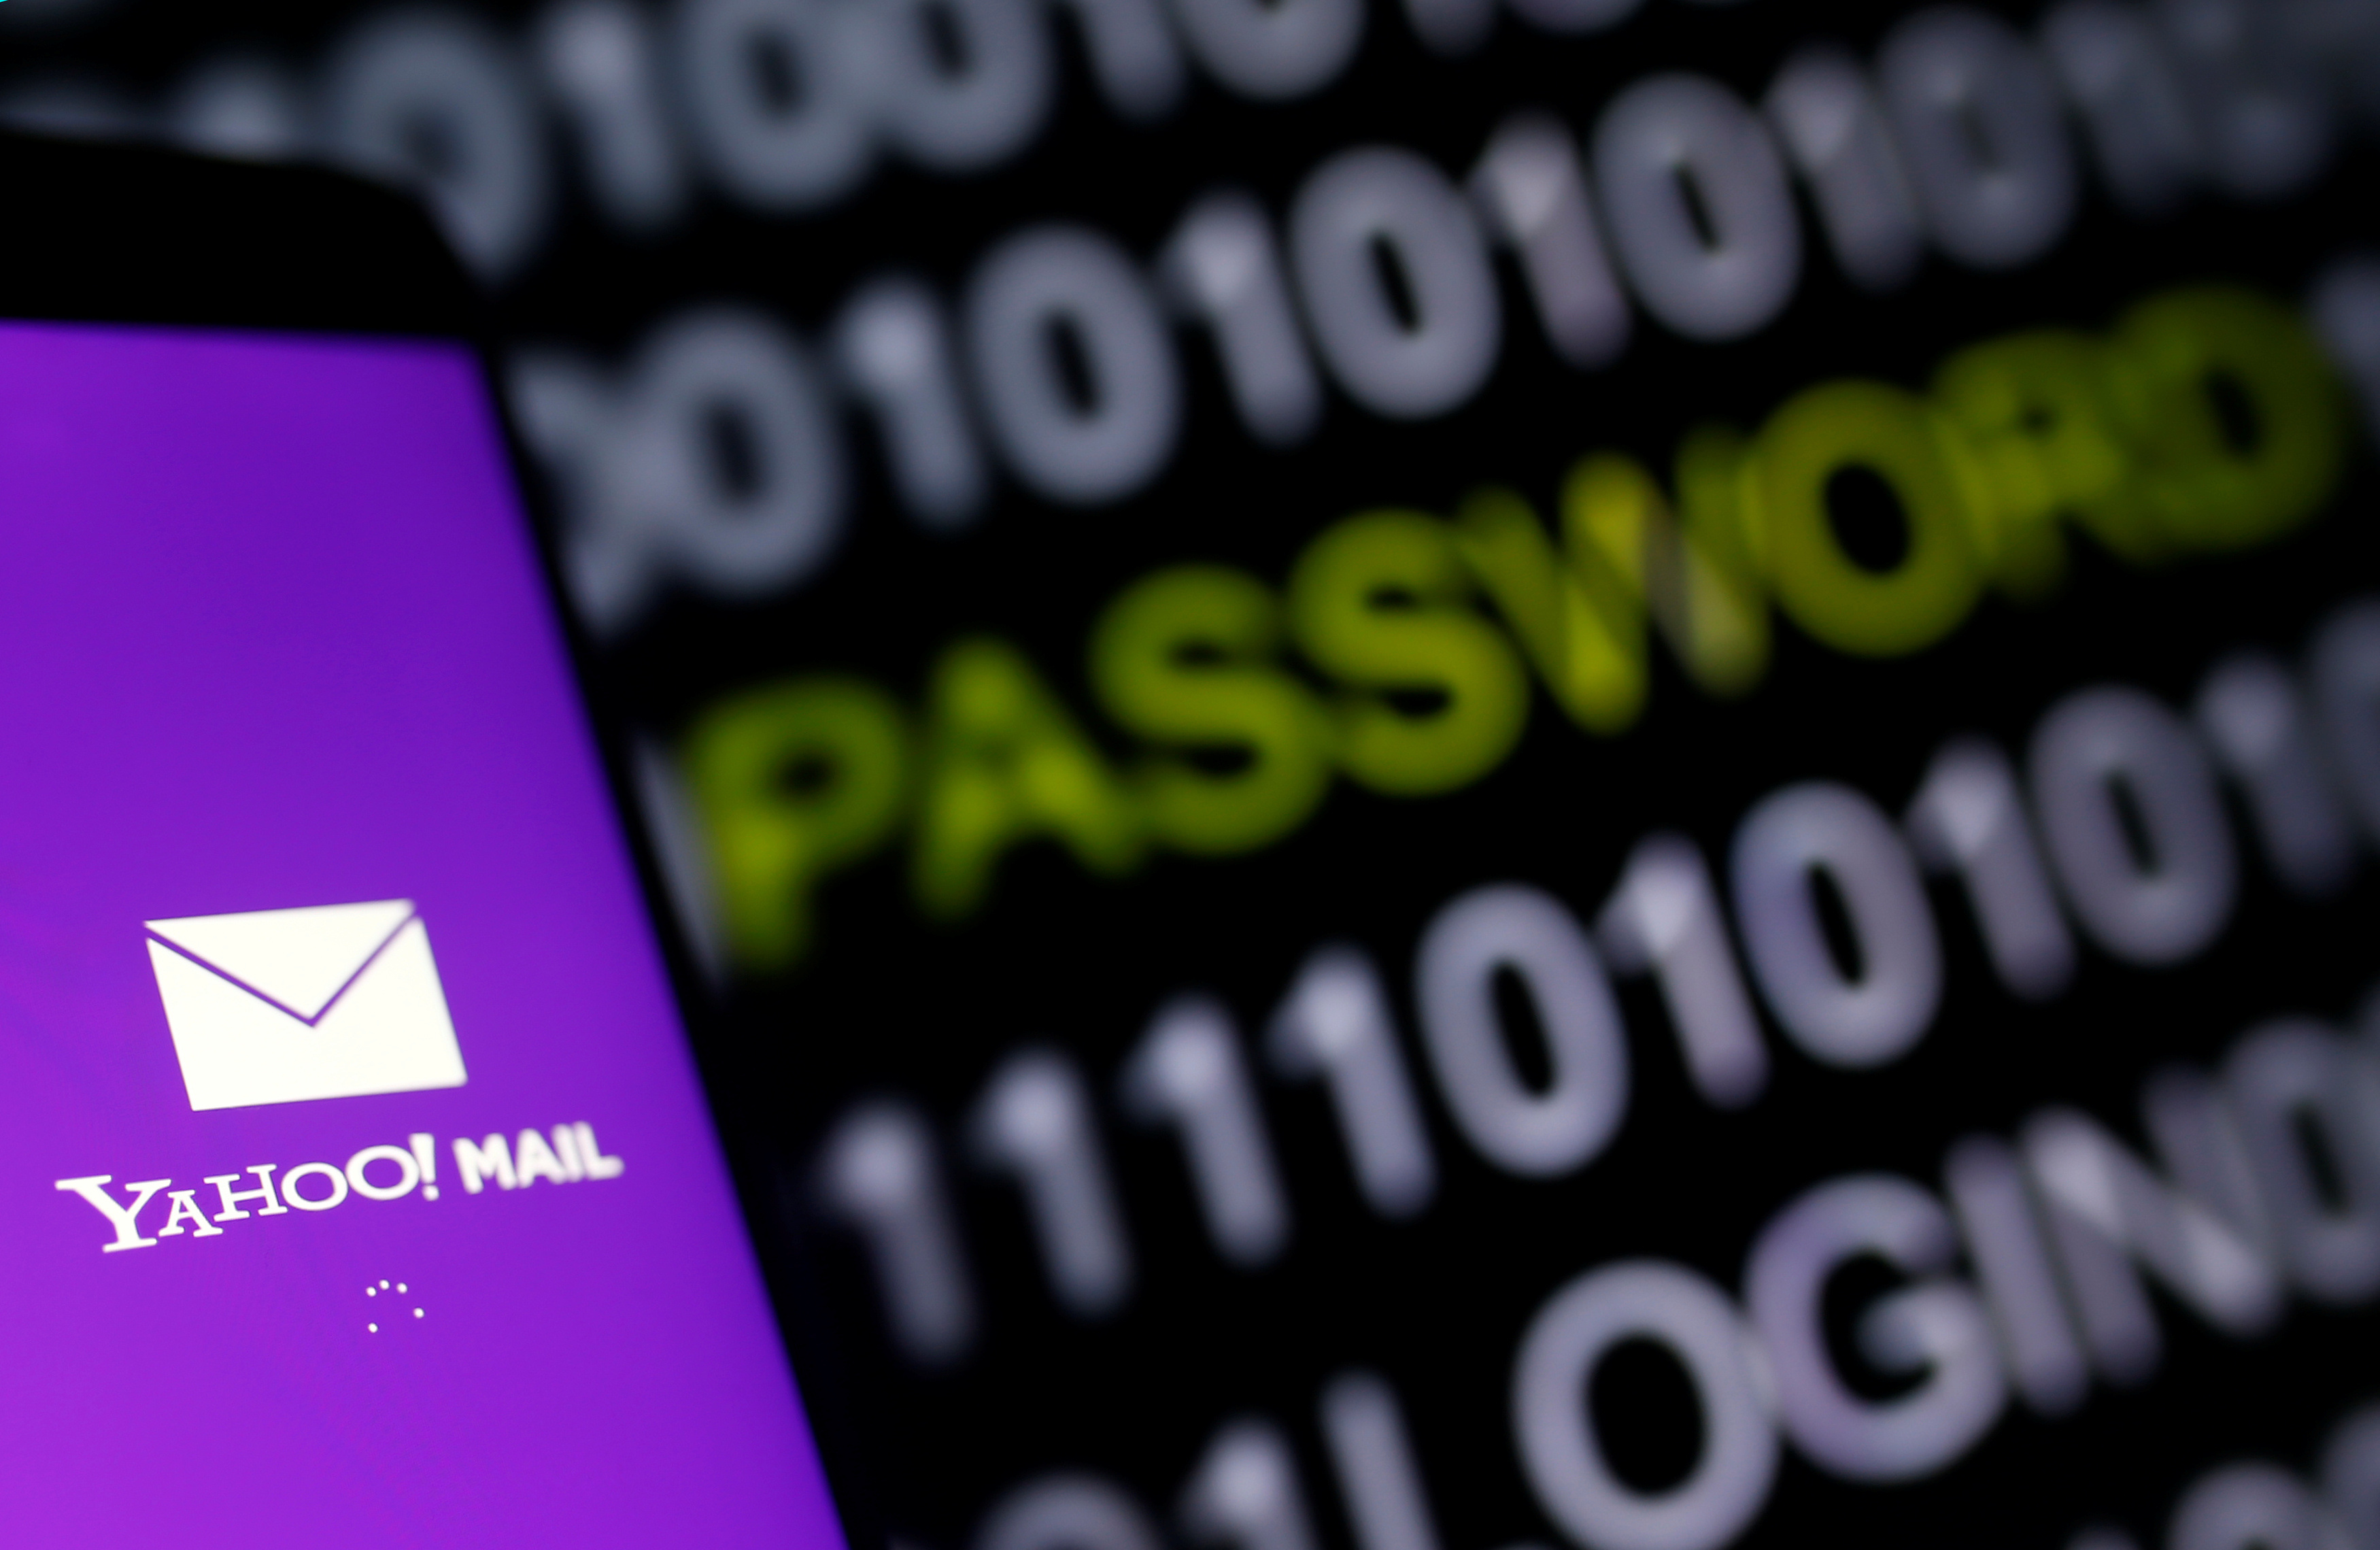 Yahoo Mail logo is displayed on a smartphone's screen in front of a code in this illustration